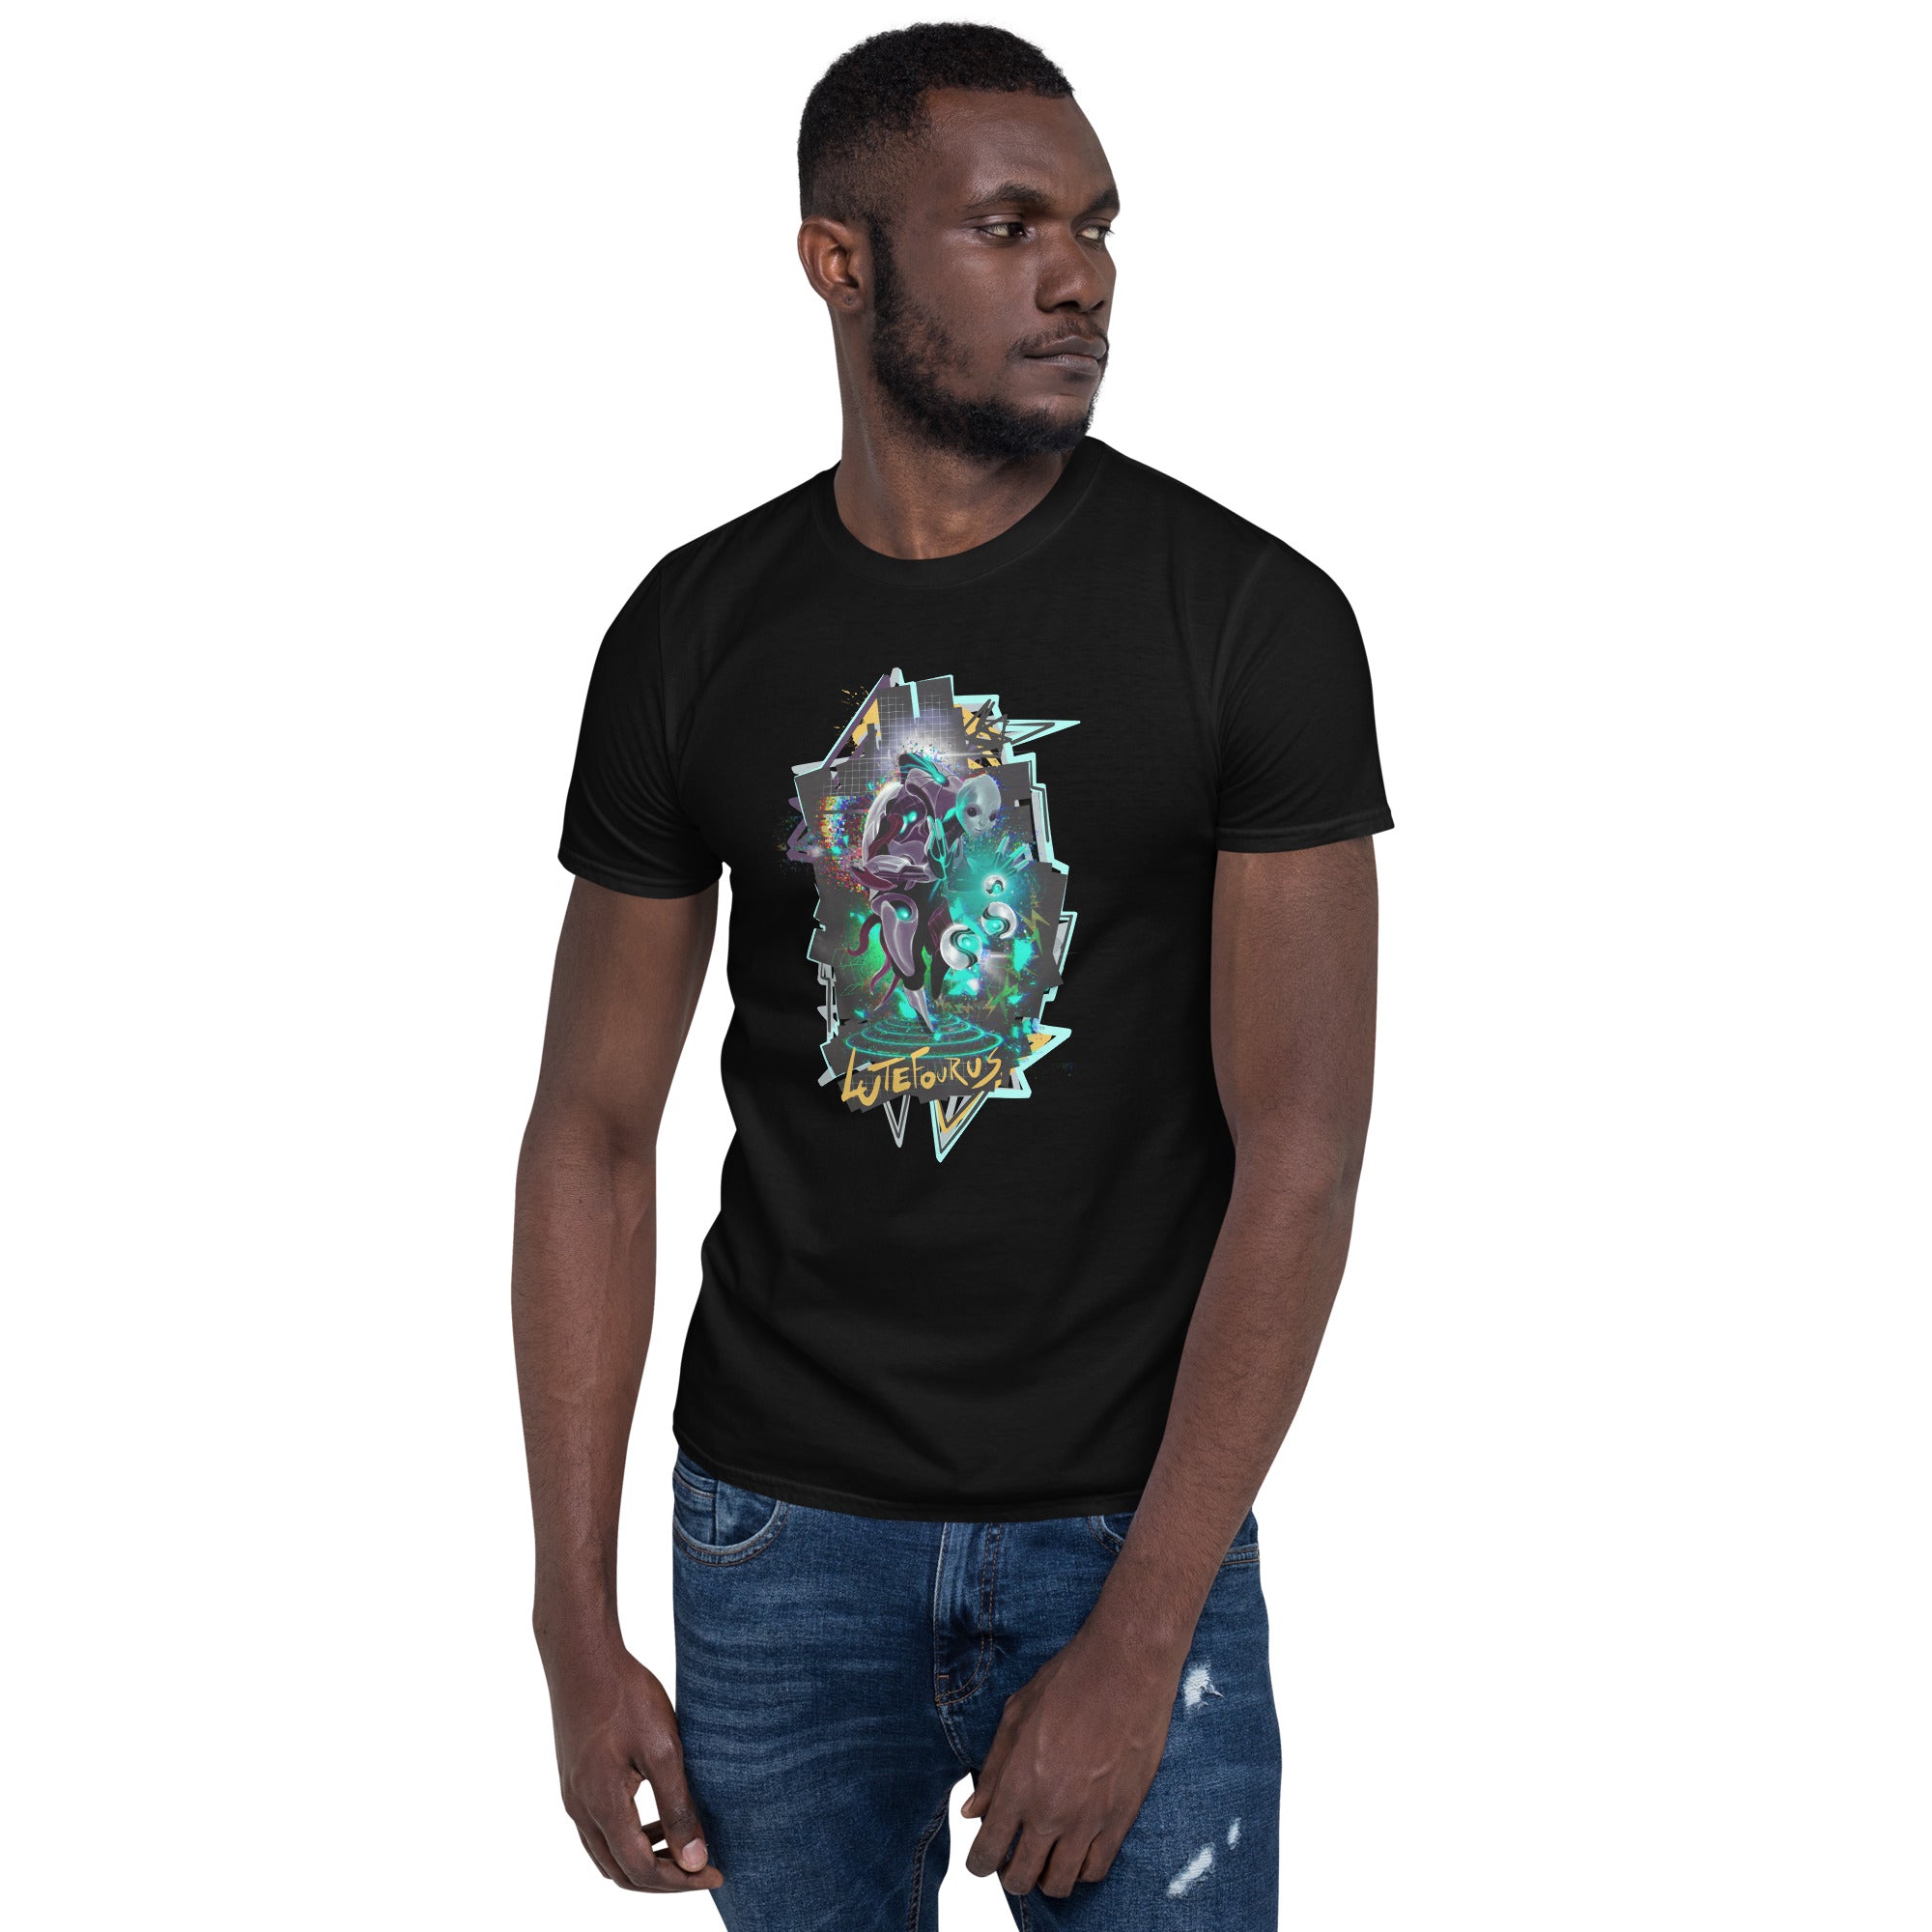 Lutefourous Time Realm Short-Sleeve Unisex T-Shirt